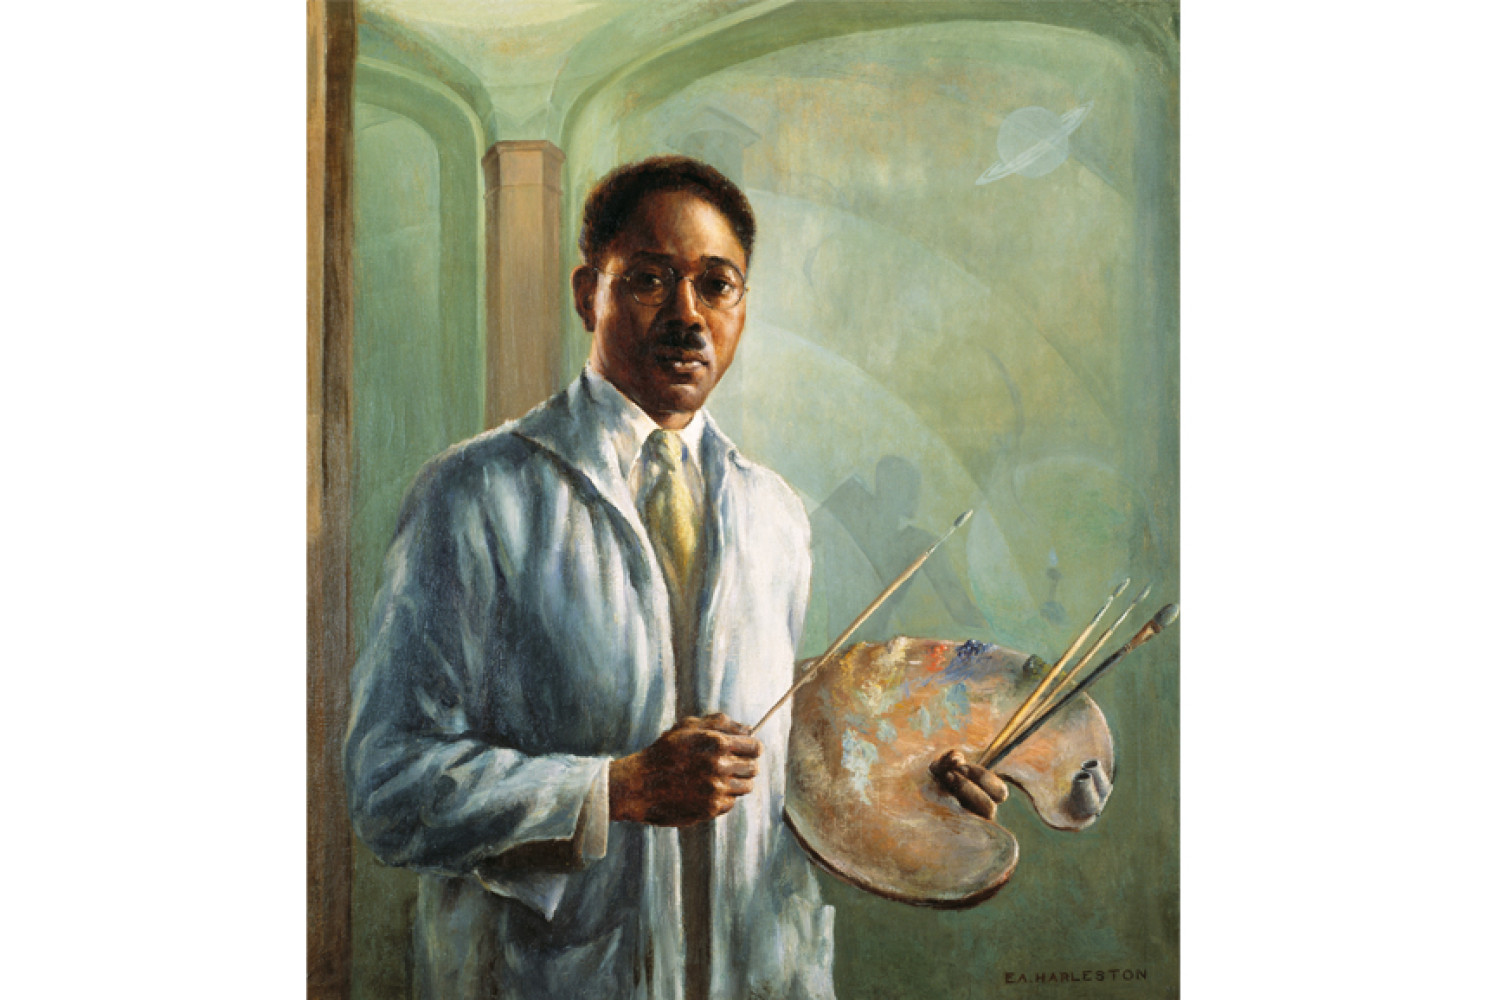 Portrait of Aaron Douglas, 1930, by Edwin Harleston (American, 1882-1931); oil on canvas; 32 1/4 x 28 1/4 inches; Museum purchase; 1988.003